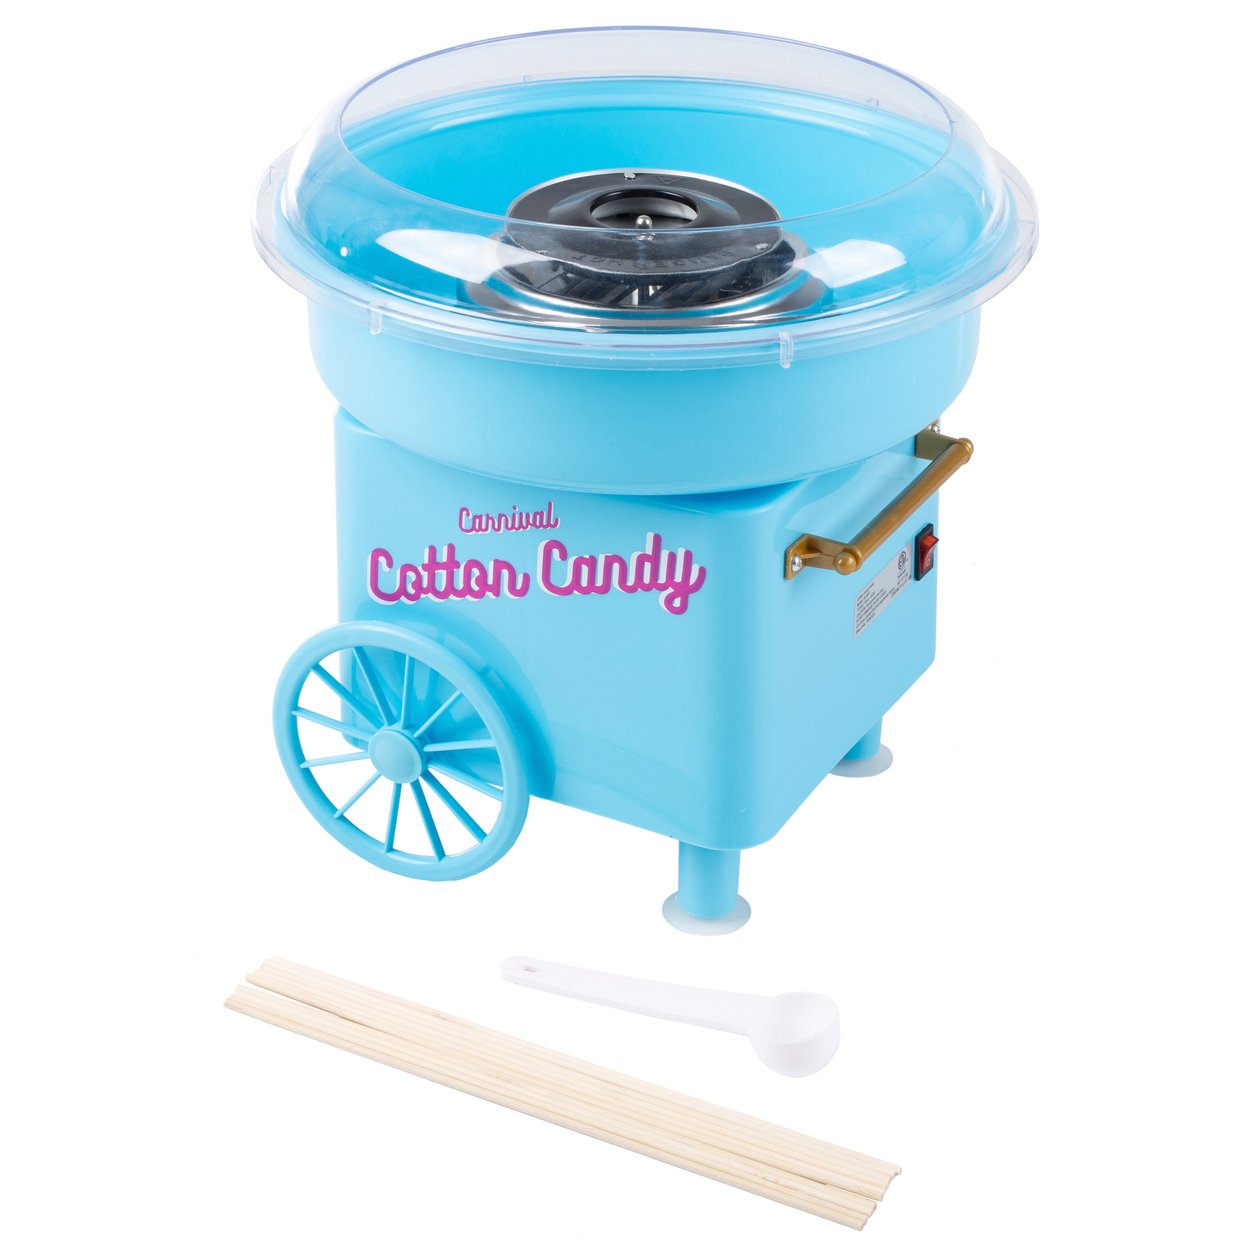 Countertop Cotton Candy Machine Includes Scoop And 10 Serving Sticks, Blue